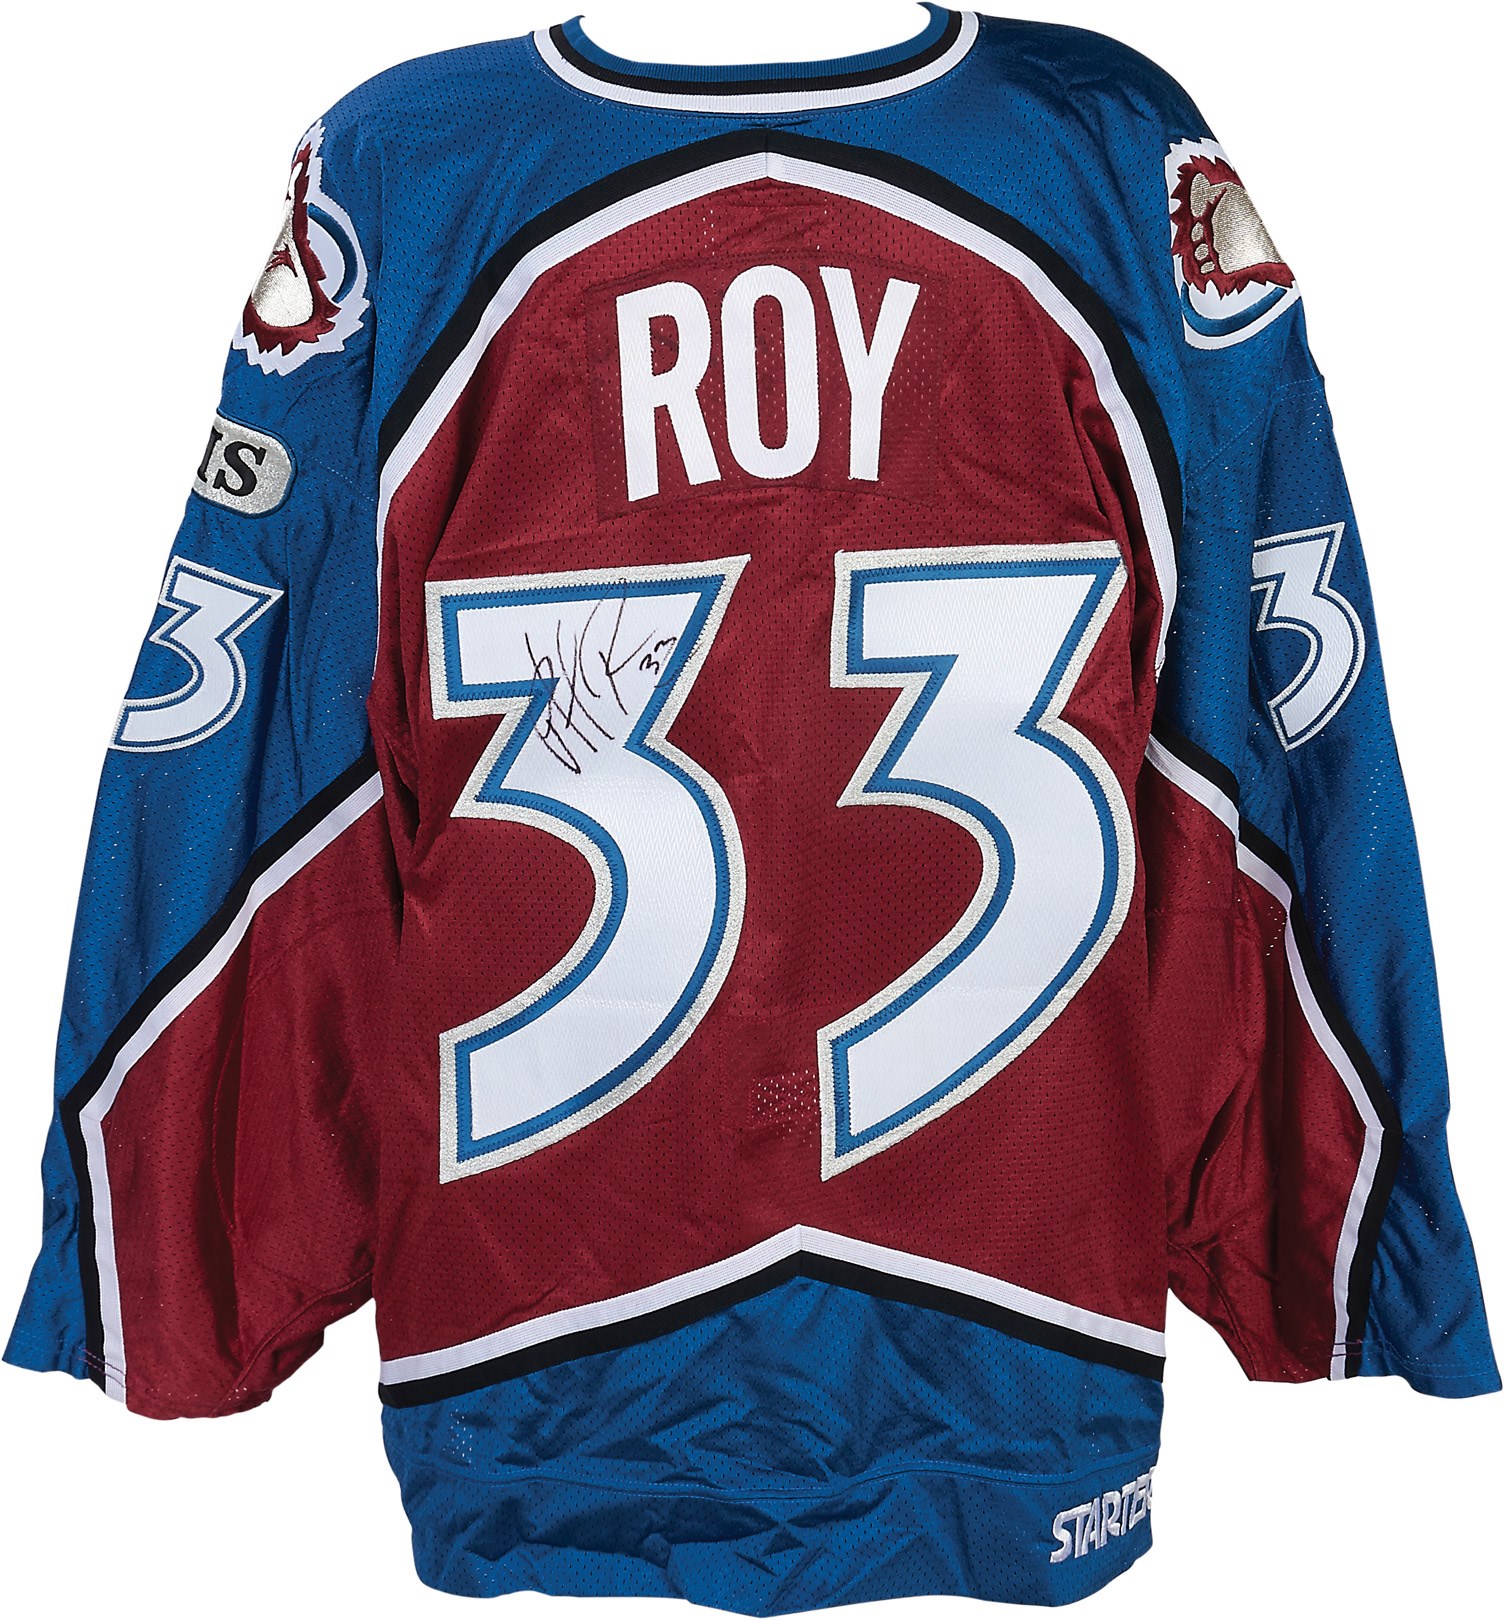 1998-99 Patrick Roy Colorado Avalanche Playoff Game Worn Jersey (Photo-Matched, MeiGray LOA)